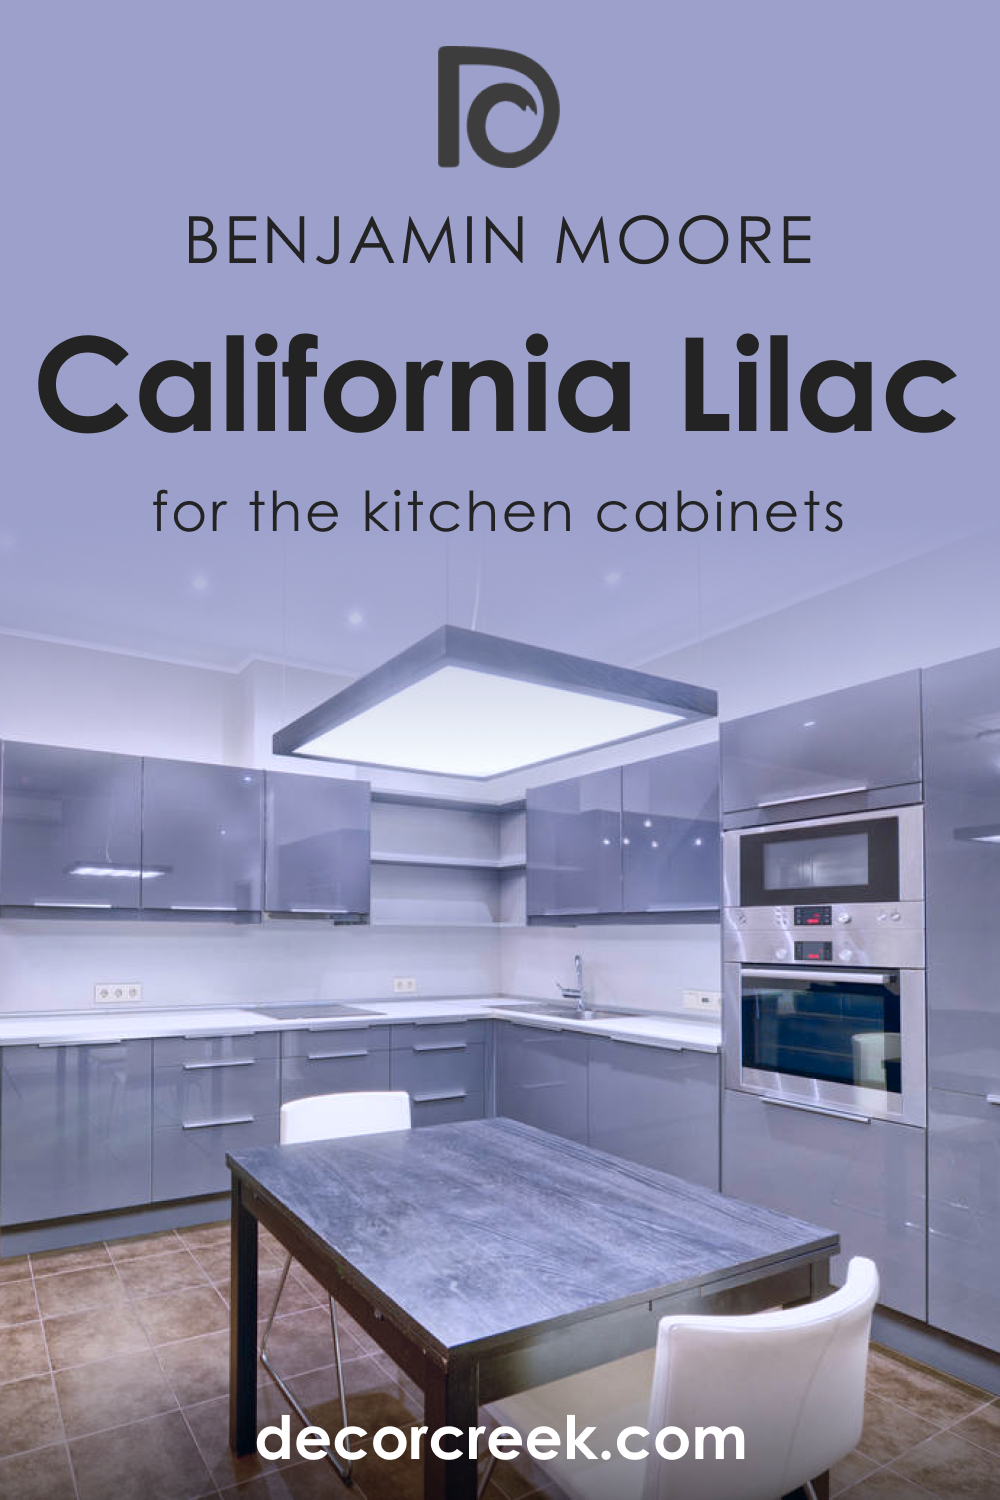 How to Use California Lilac 2068-40 on the Kitchen Cabinets?